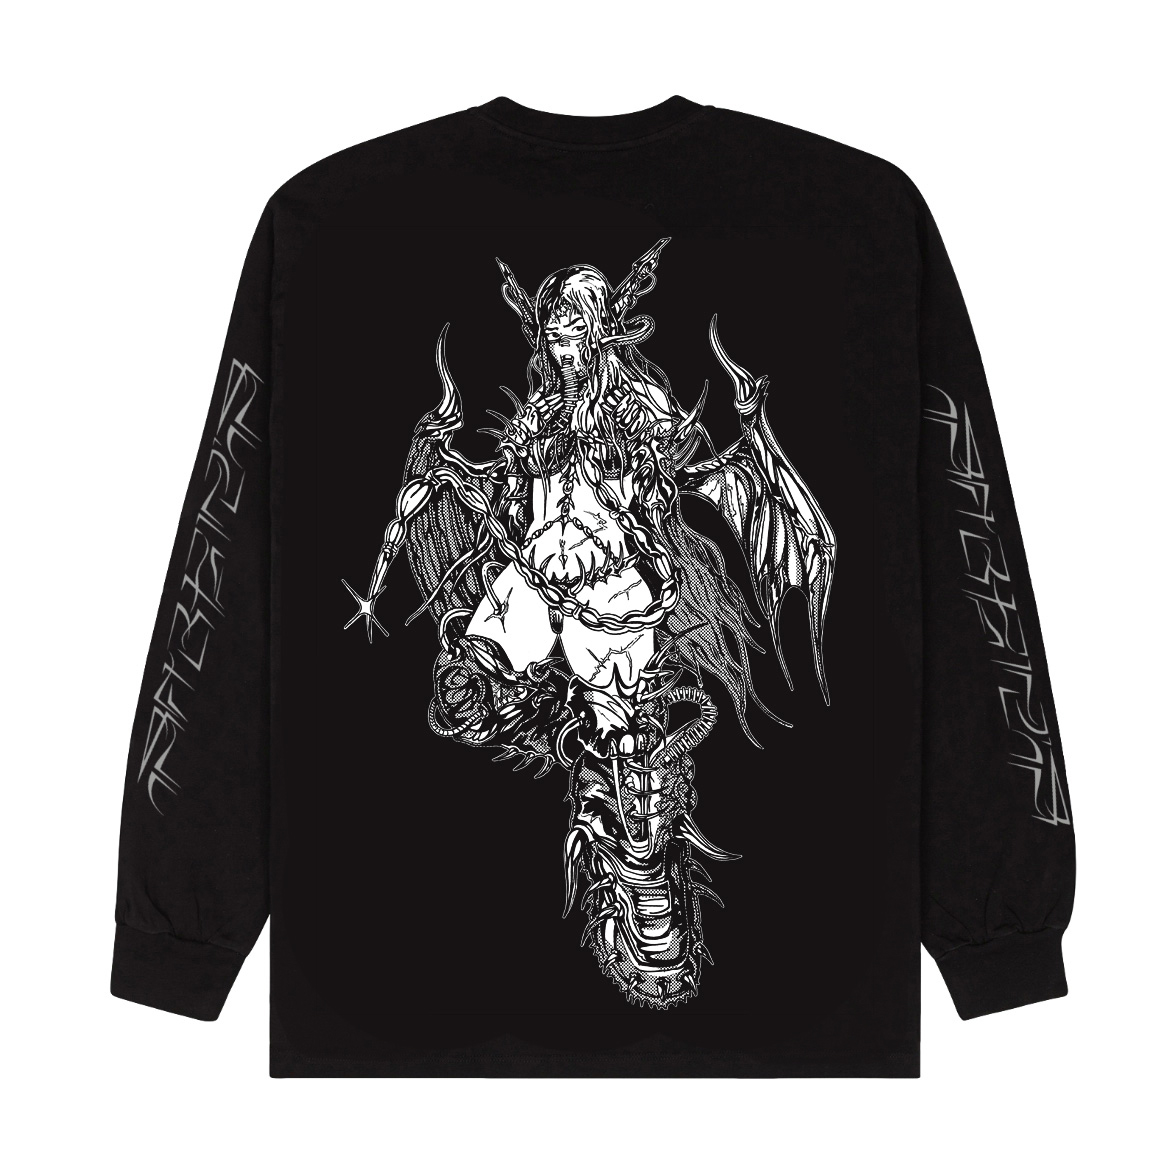 Limited Edition SIRENS Longsleeve - BACK